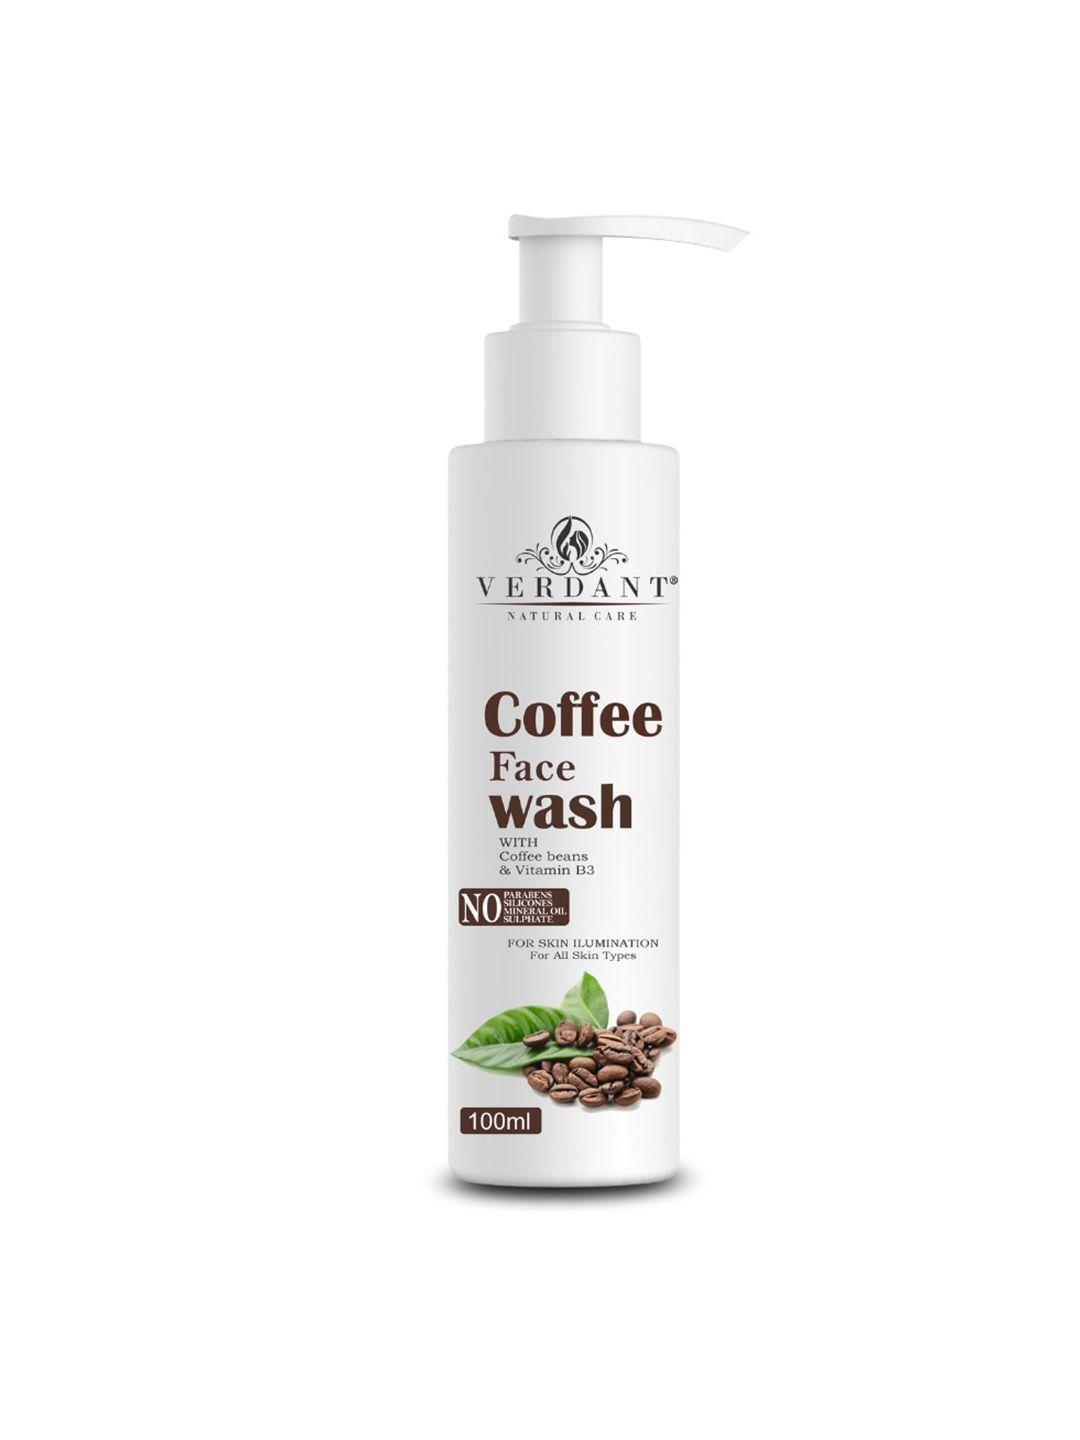 verdant natural care coffee face wash with coffee beans & viatmin b3 for skin ilumination - 100 ml